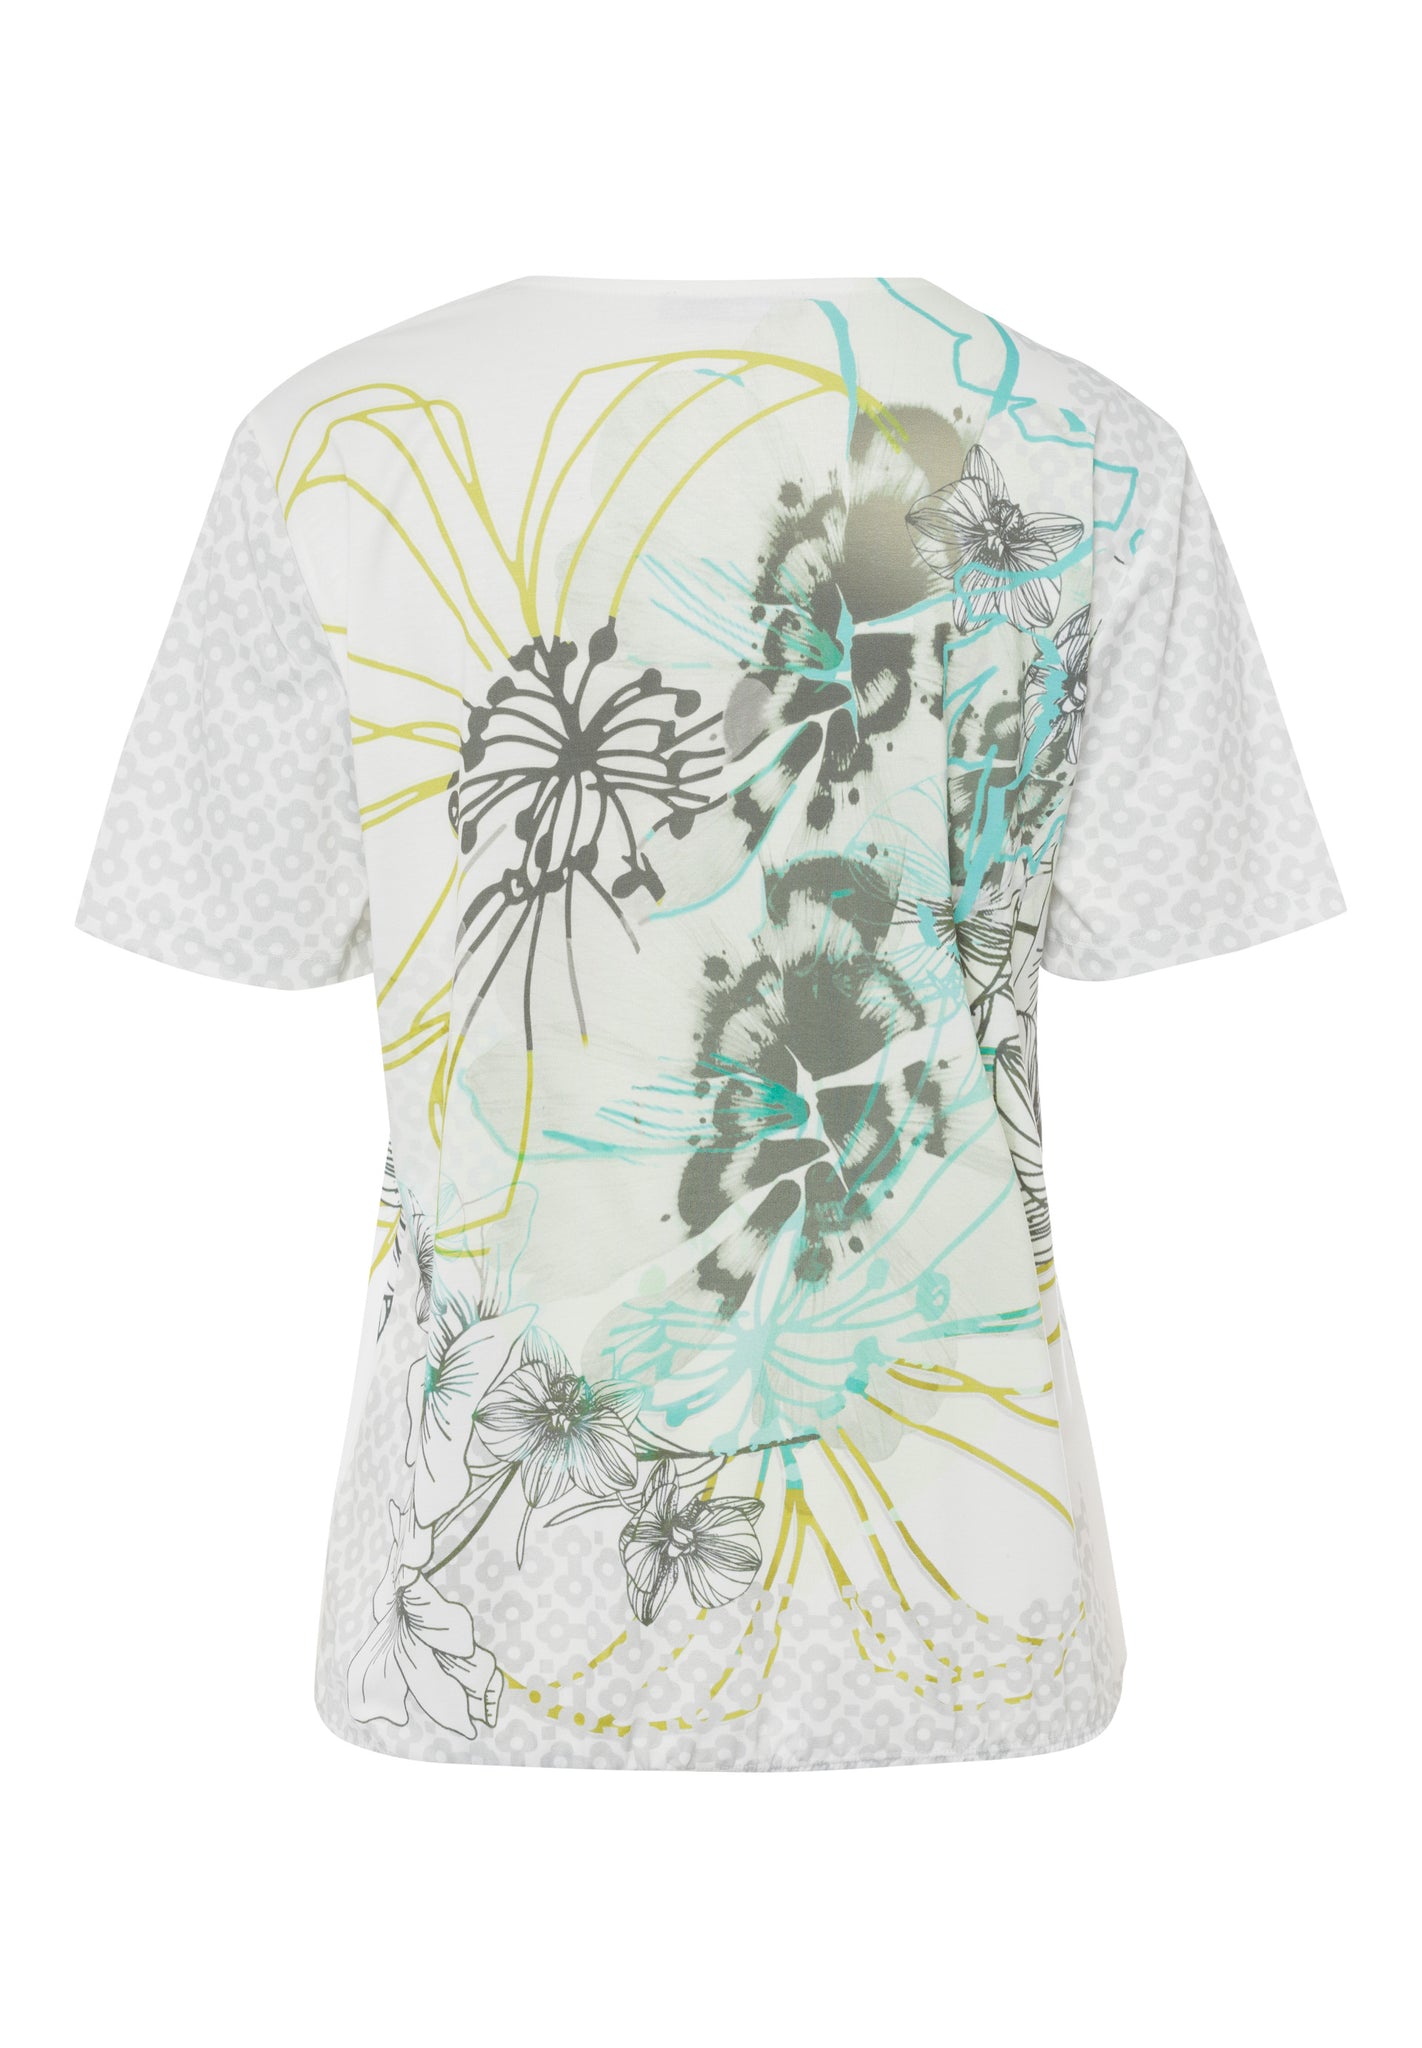 Frank Walder Caribbean Dream collection floral print short sleeve blouse in white

Product code 203.460